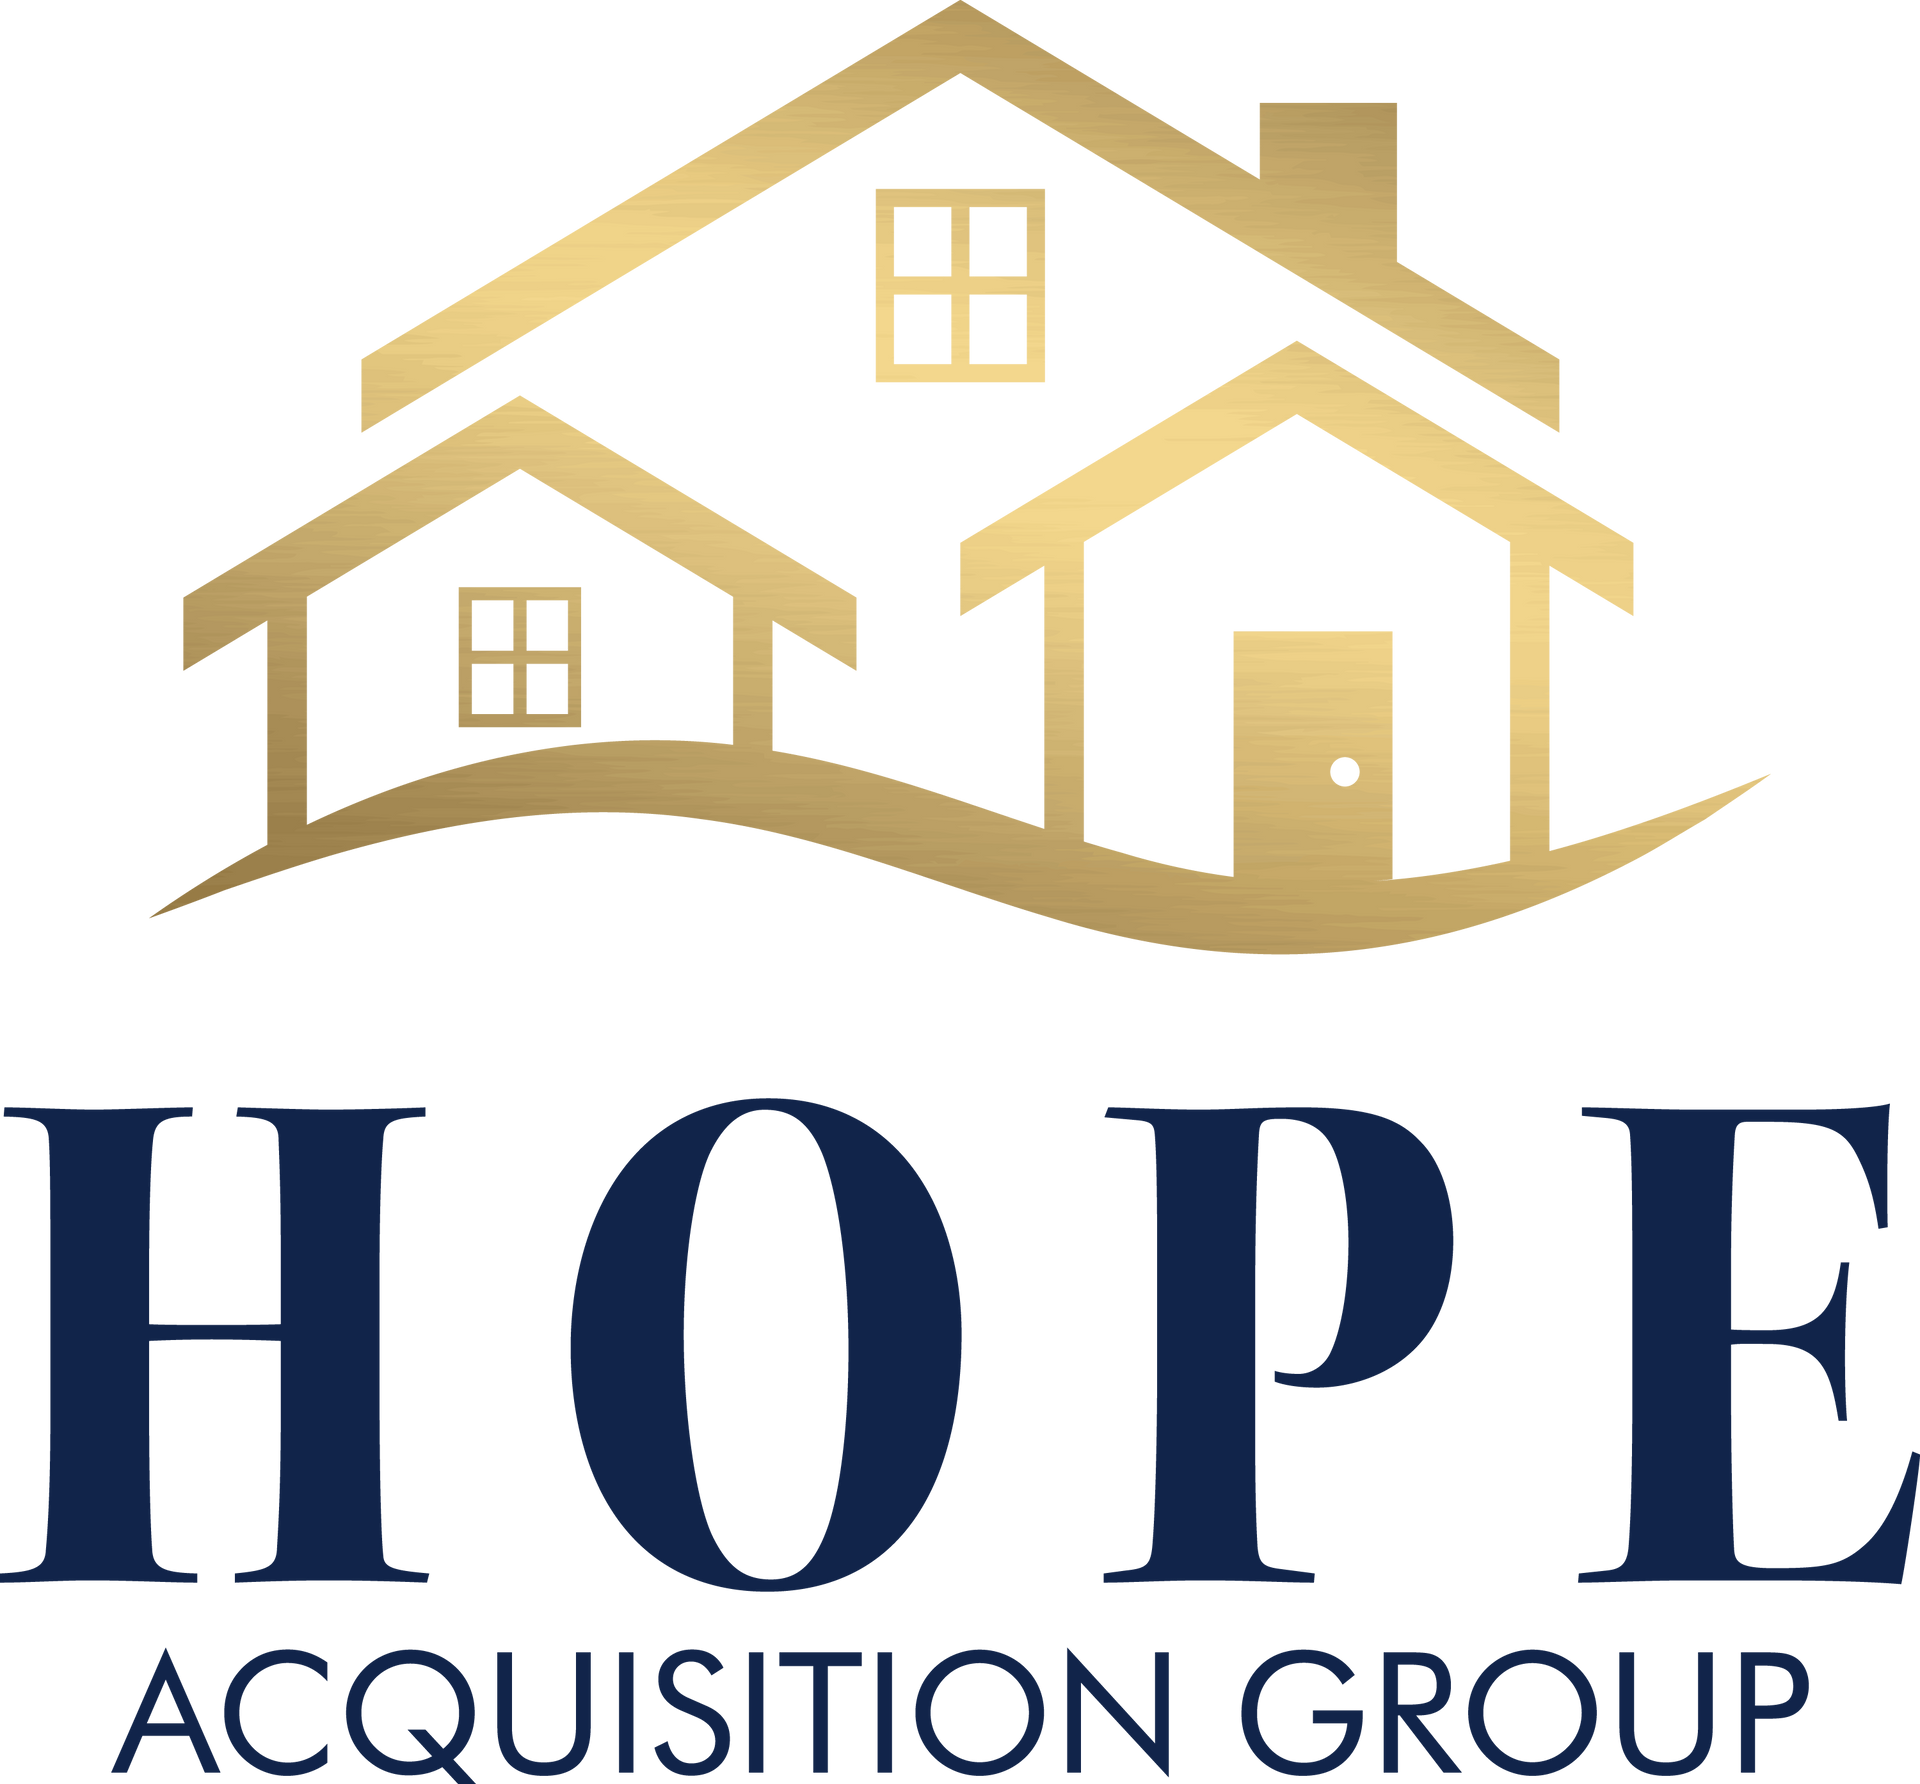 The logo for hope acquisition group shows a house with two windows and a door.